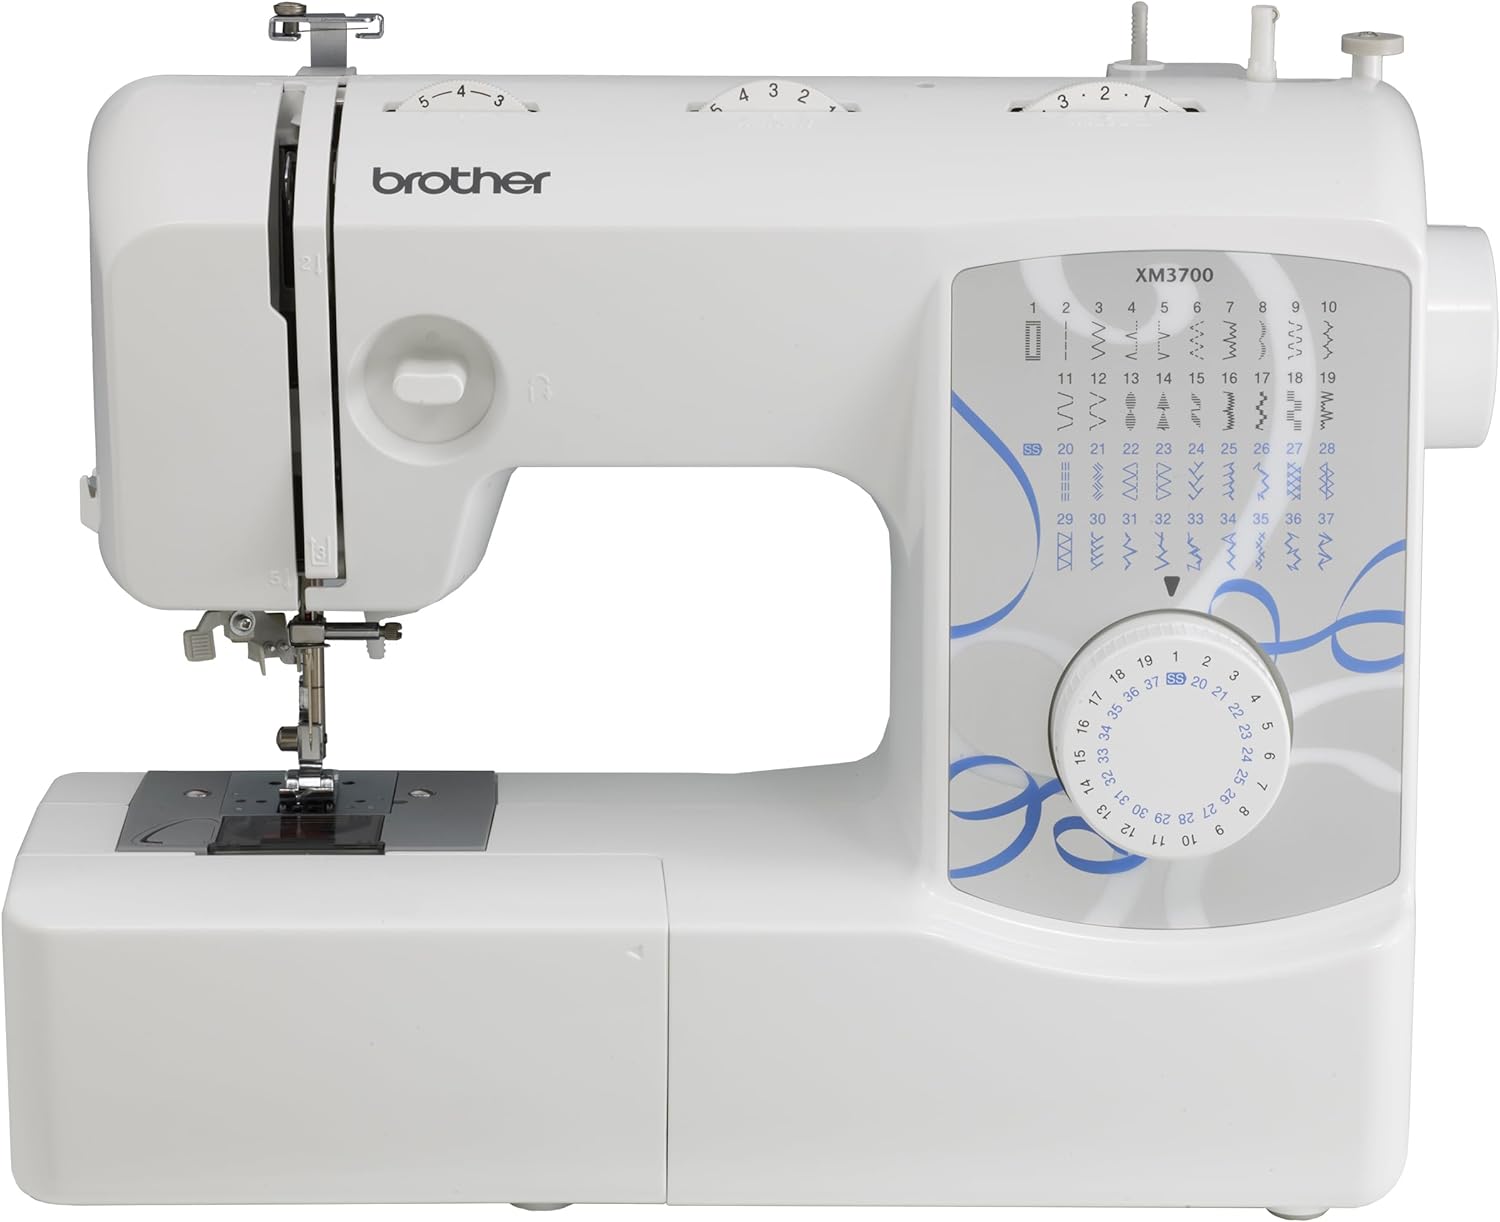 Buy the Brother XM3700 Sewing Machine at Best Price